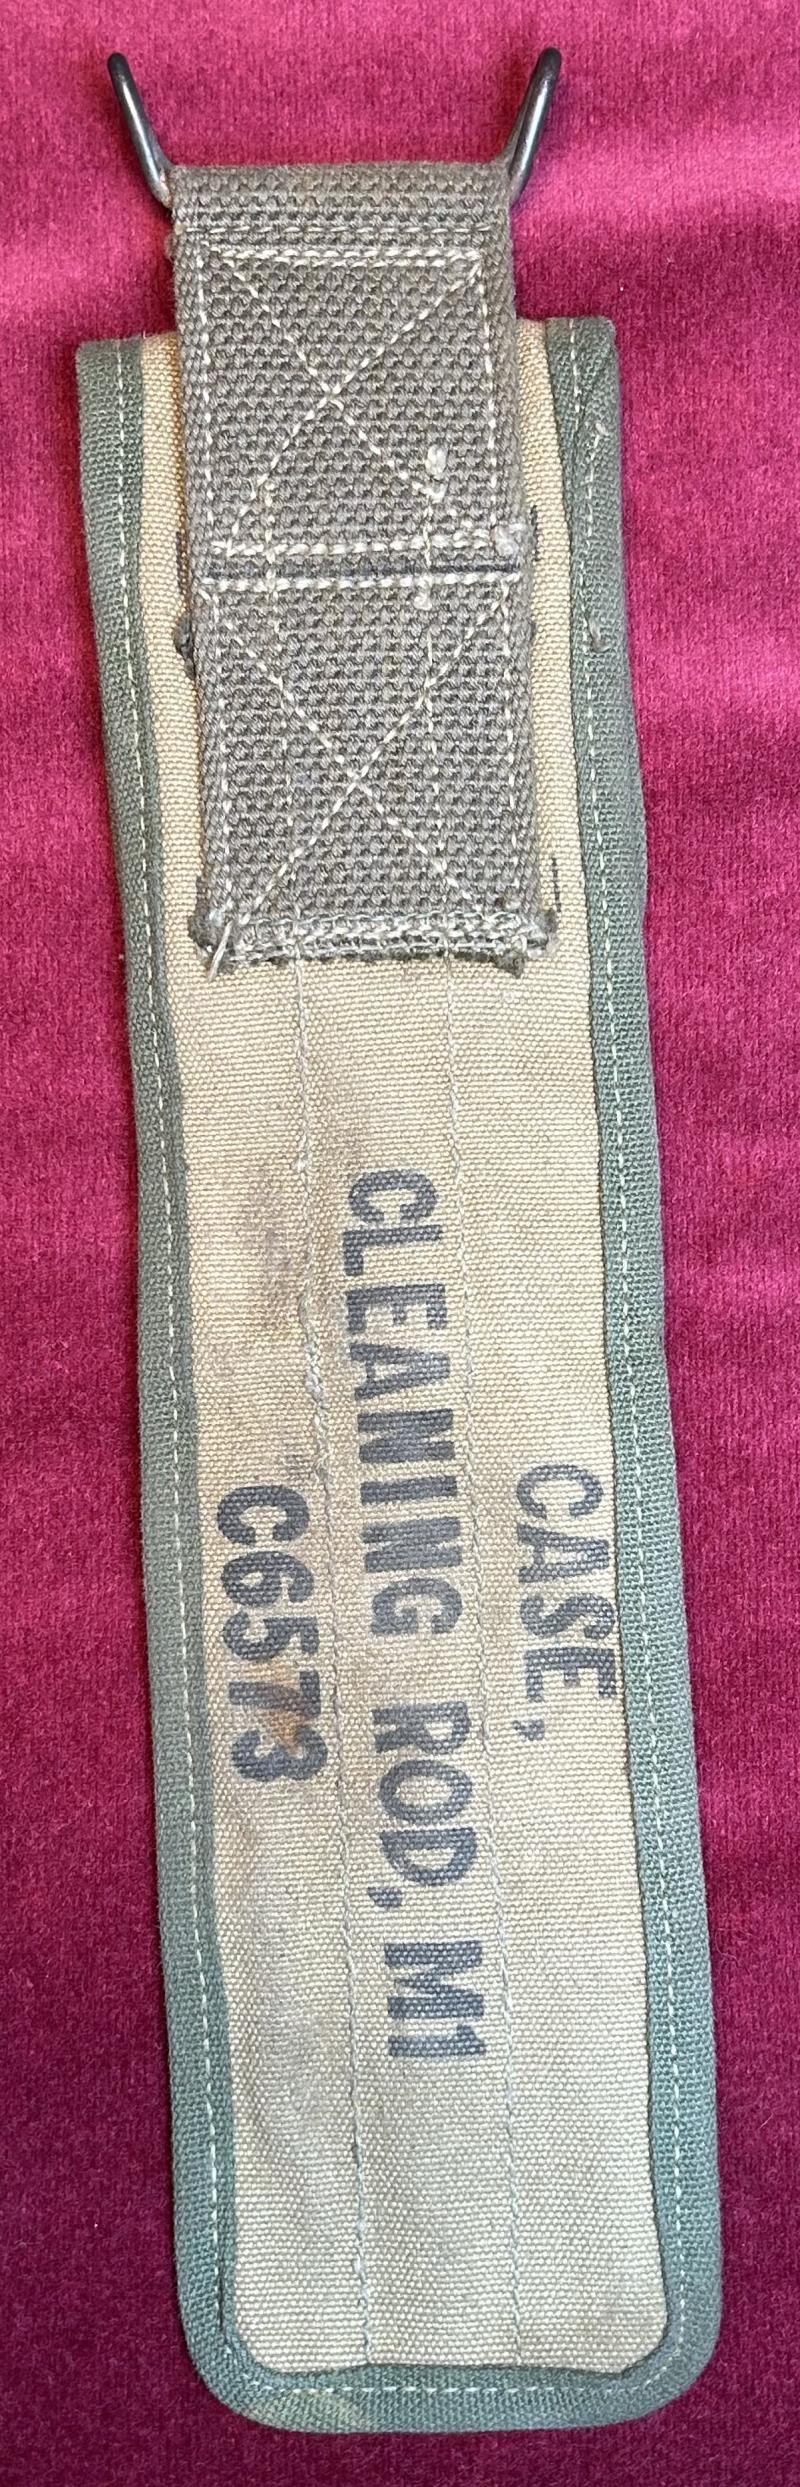 US Army M1 Garand Cleaning rod canvas case M1-C6573